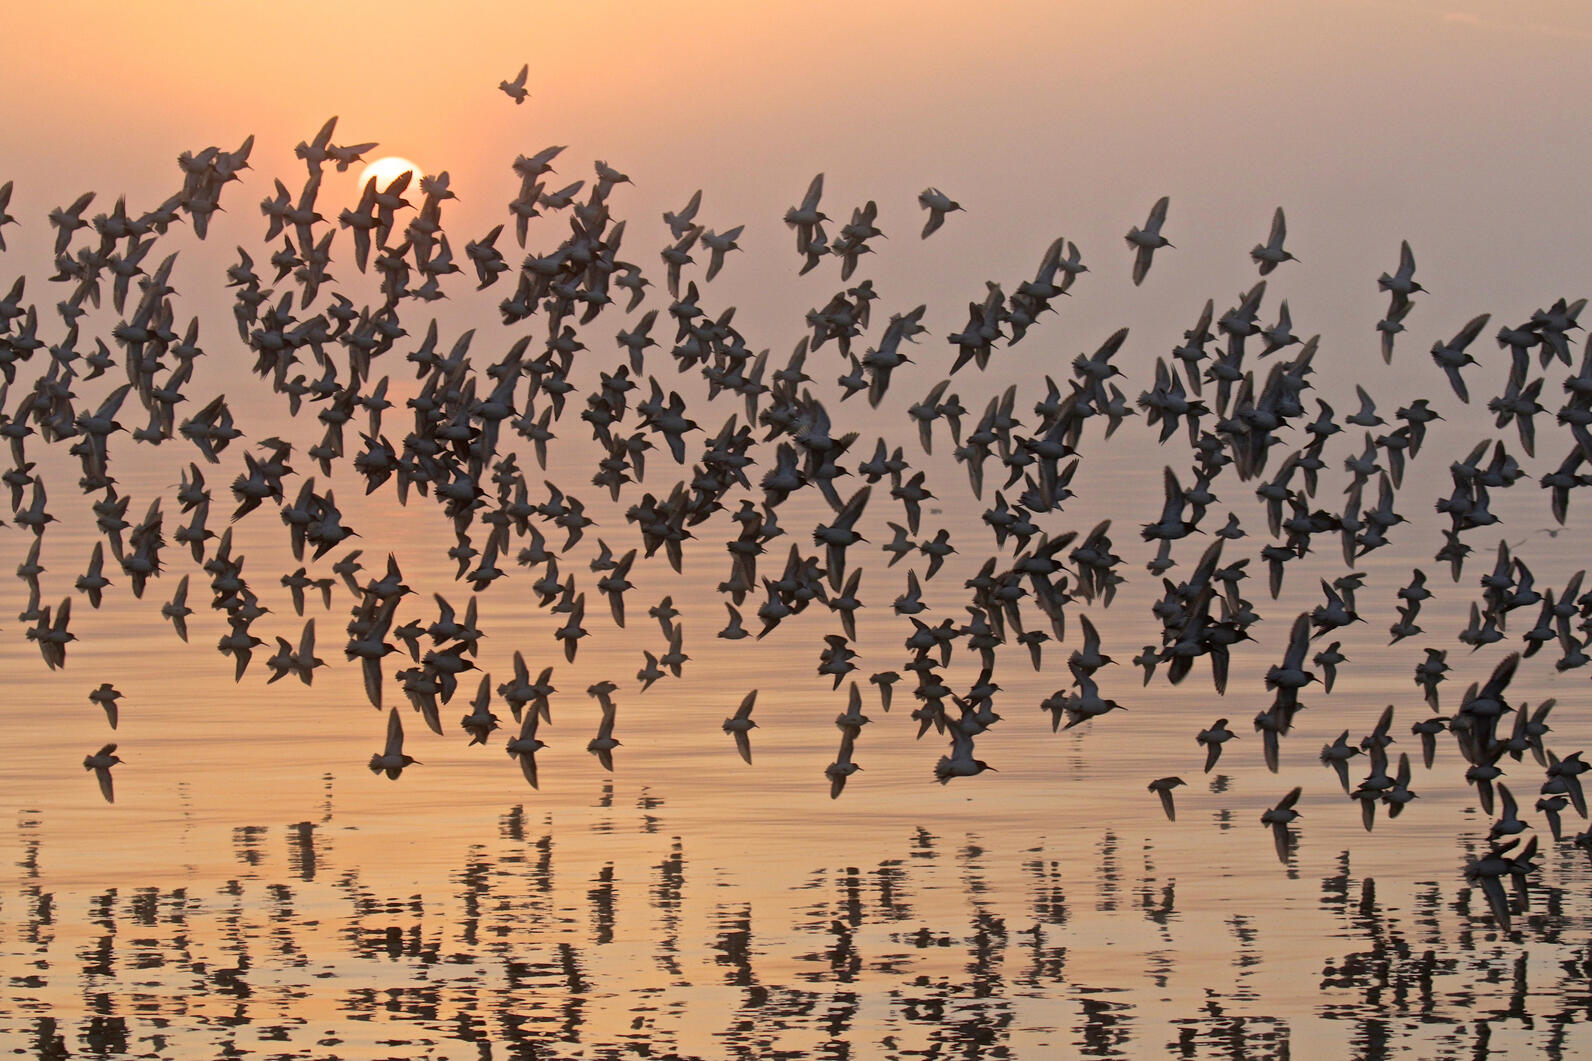 A flock of Western Sandpiper in flight over water at sunset.